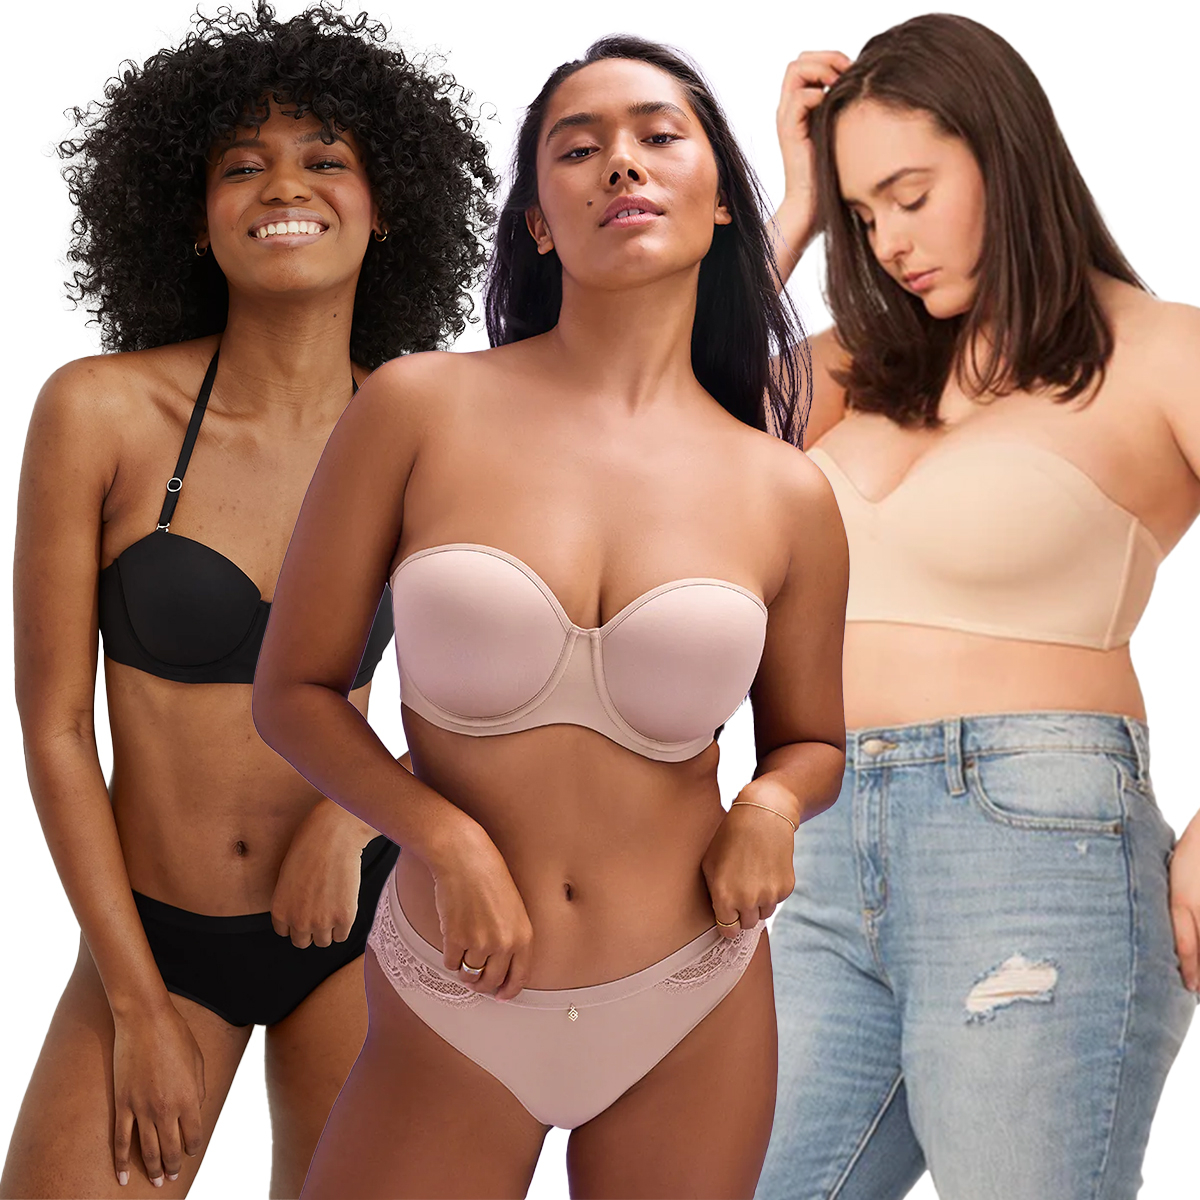 The 10 Best Strapless Bras for Every Bust Size and Outfit Need